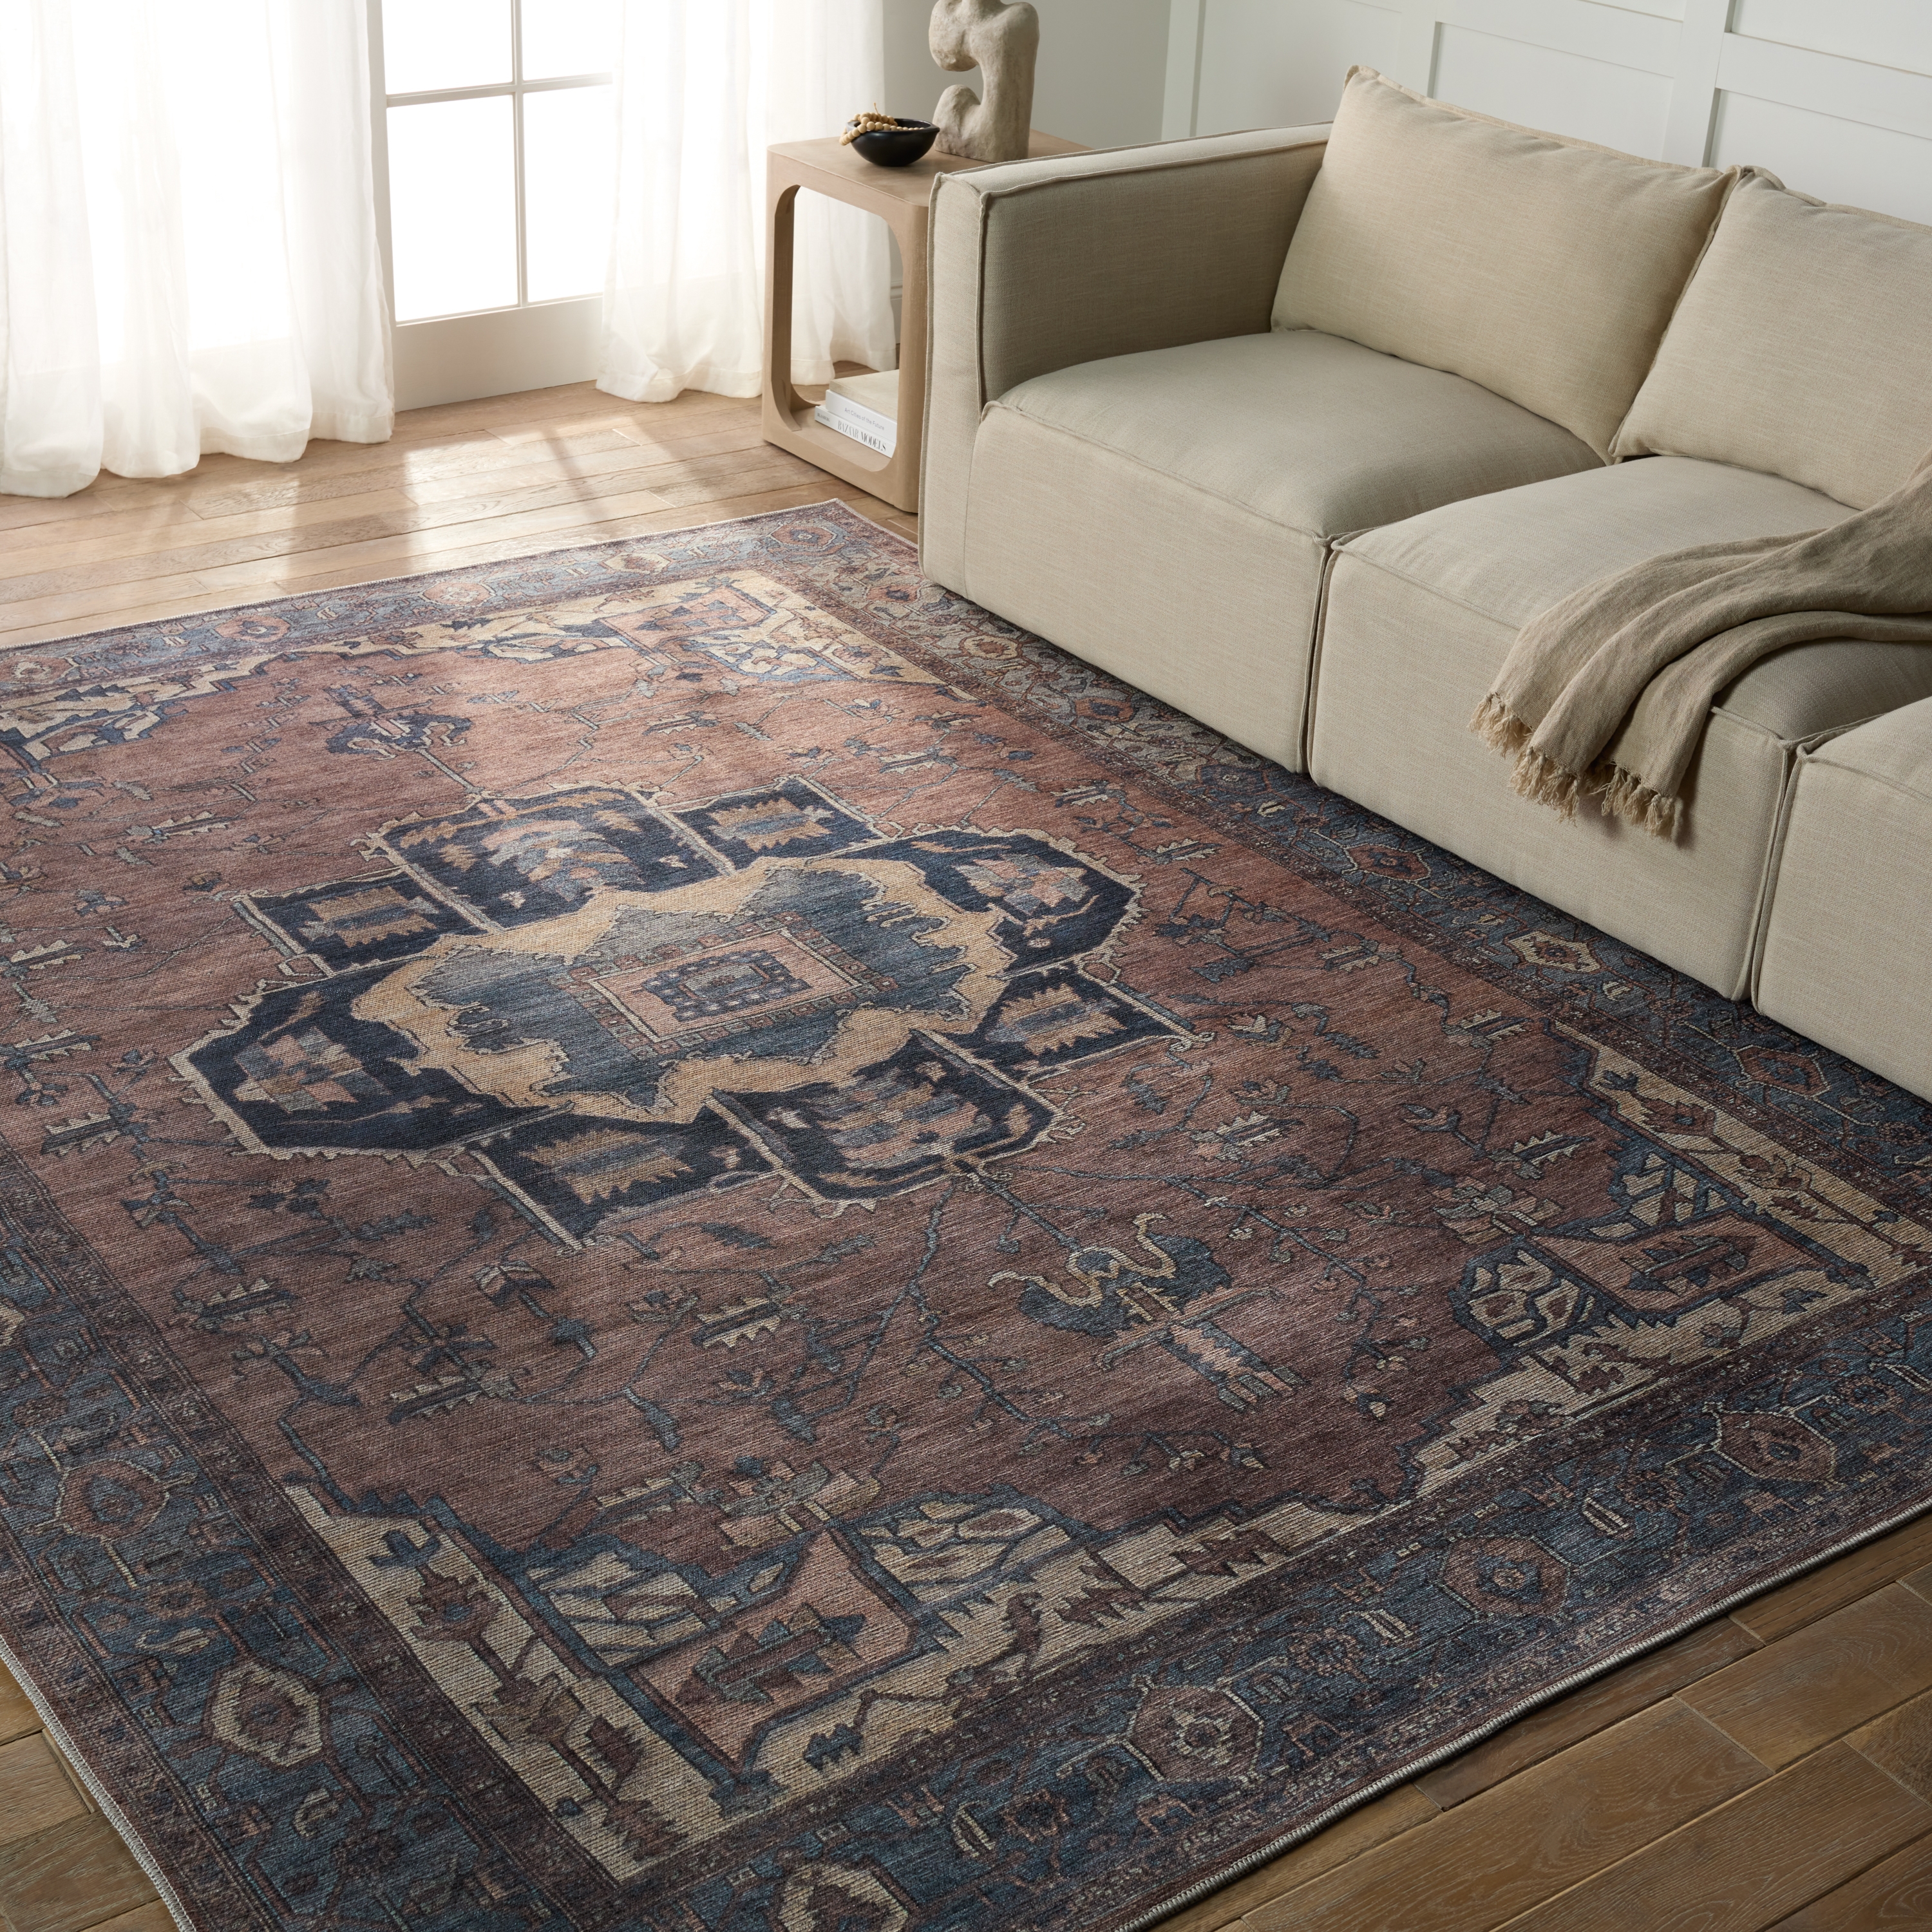 Vibe by Barrymore Medallion Blue/ Dark Brown Area Rug (10'6"X14') - Image 4